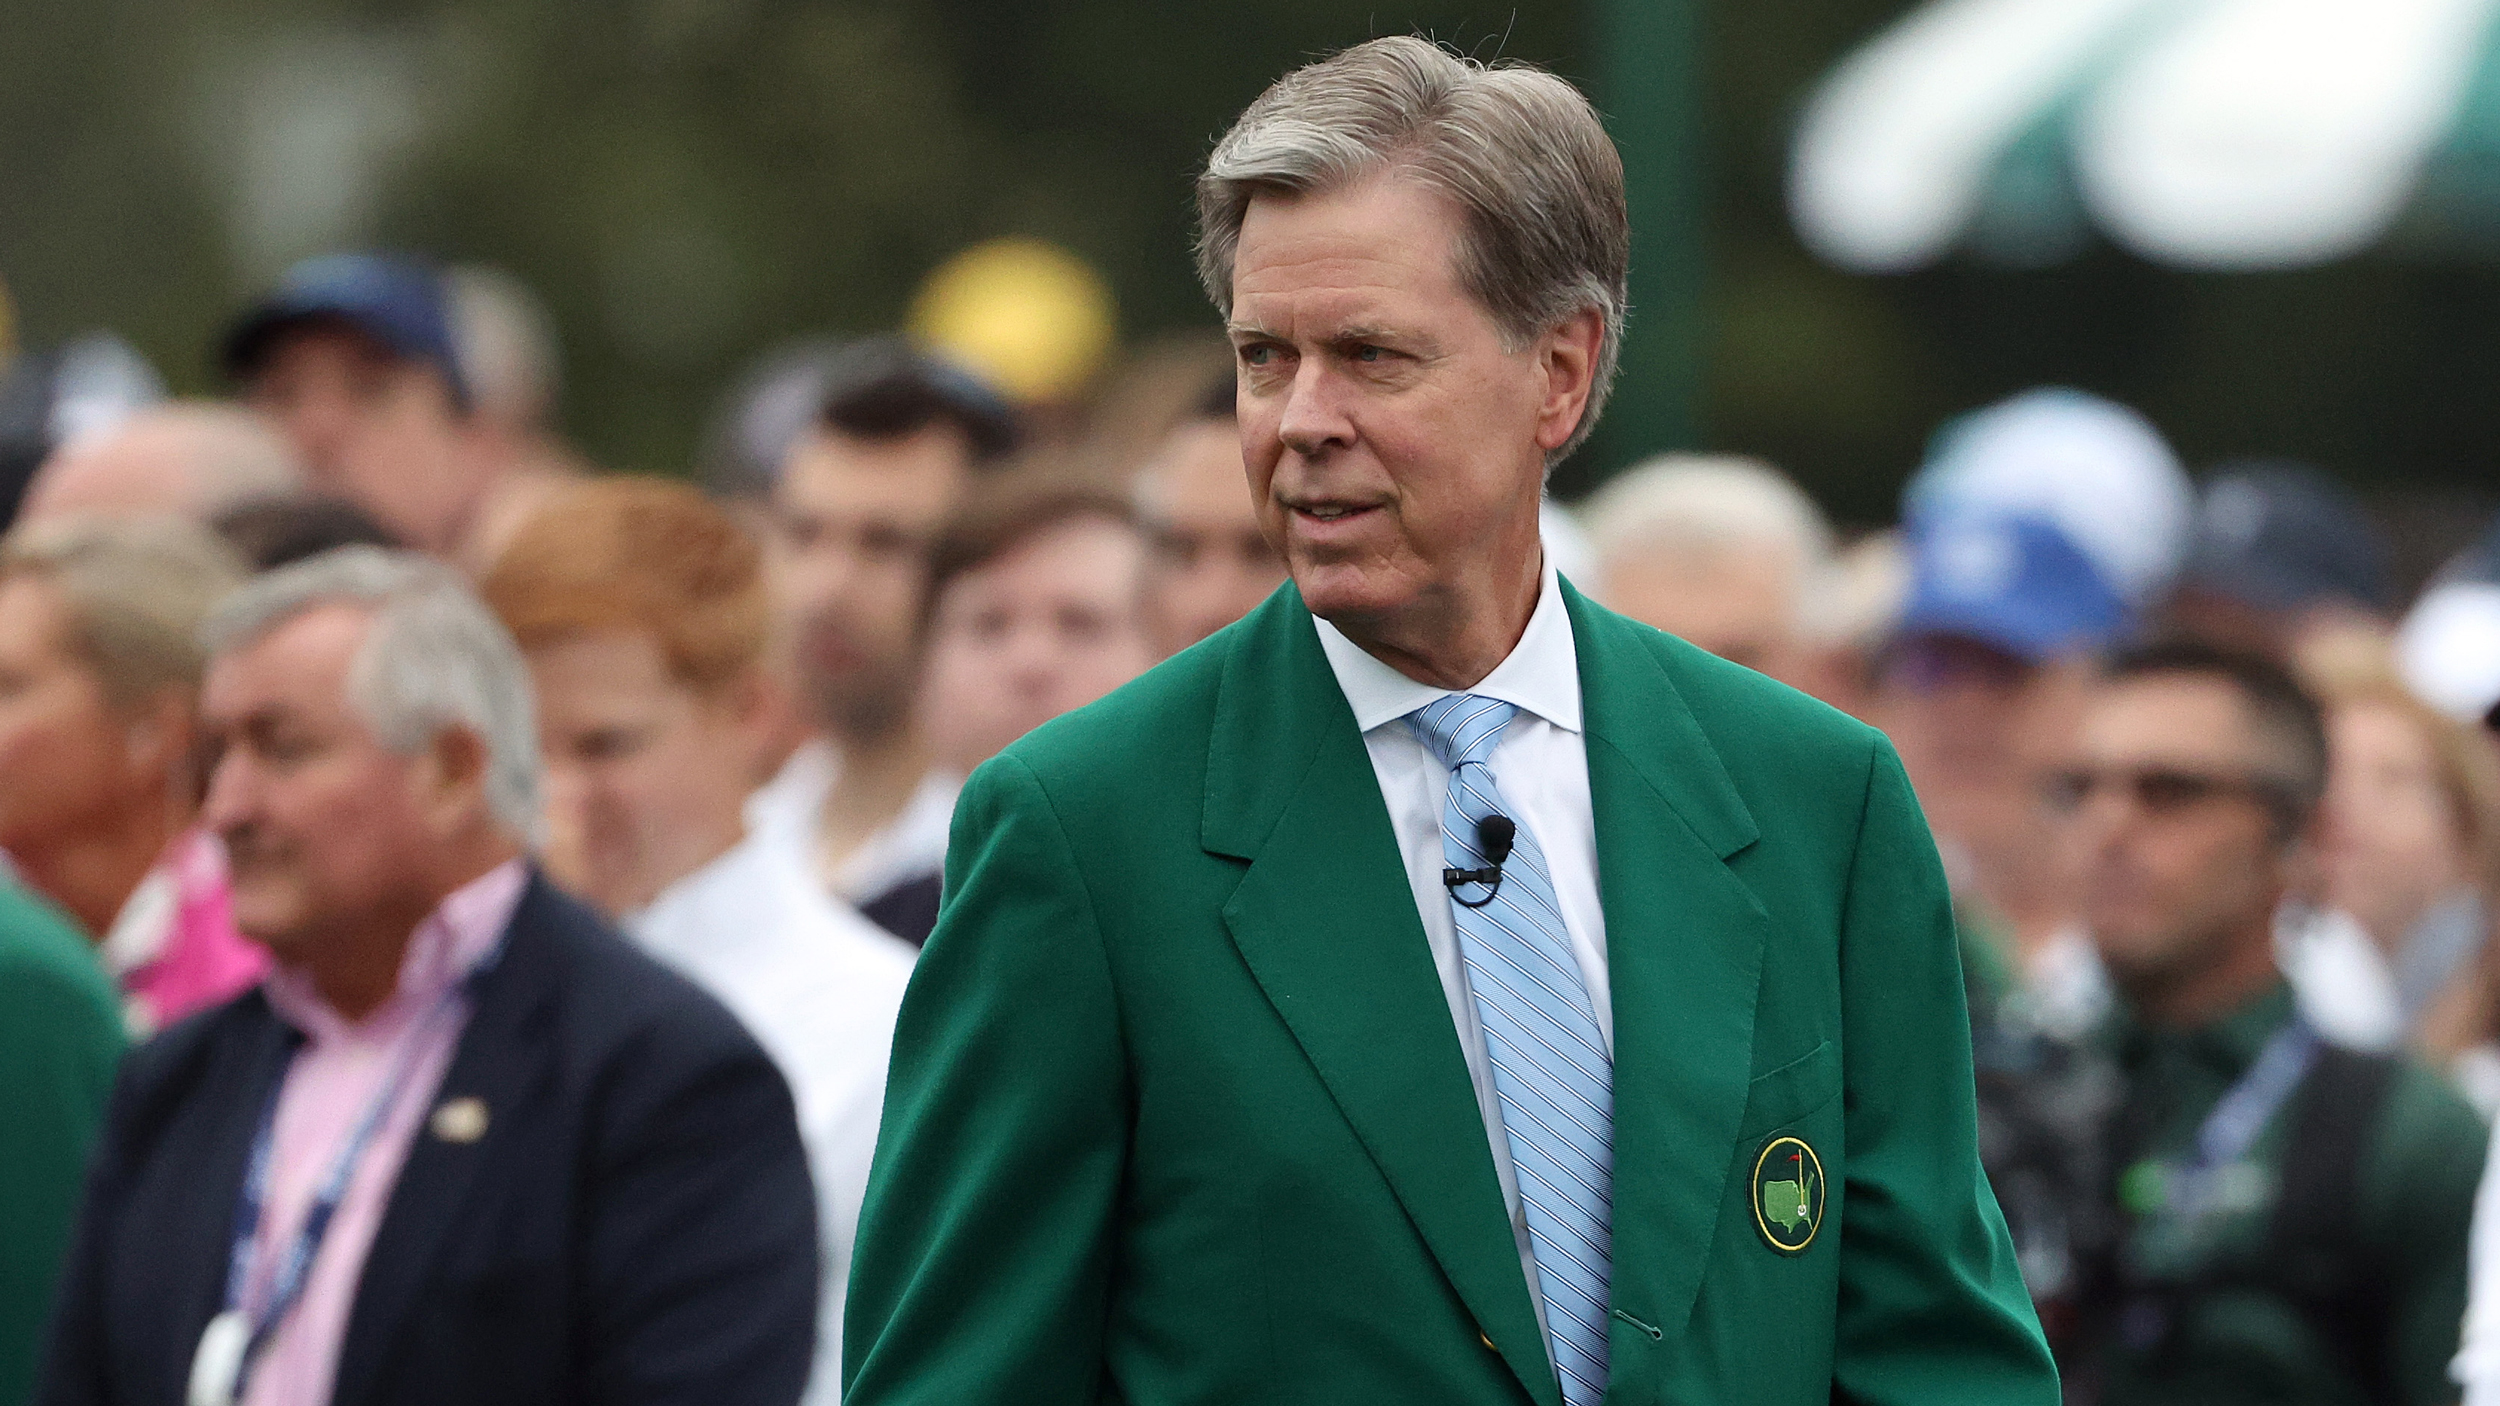 Fred Ridley in his green jacket at The Masters